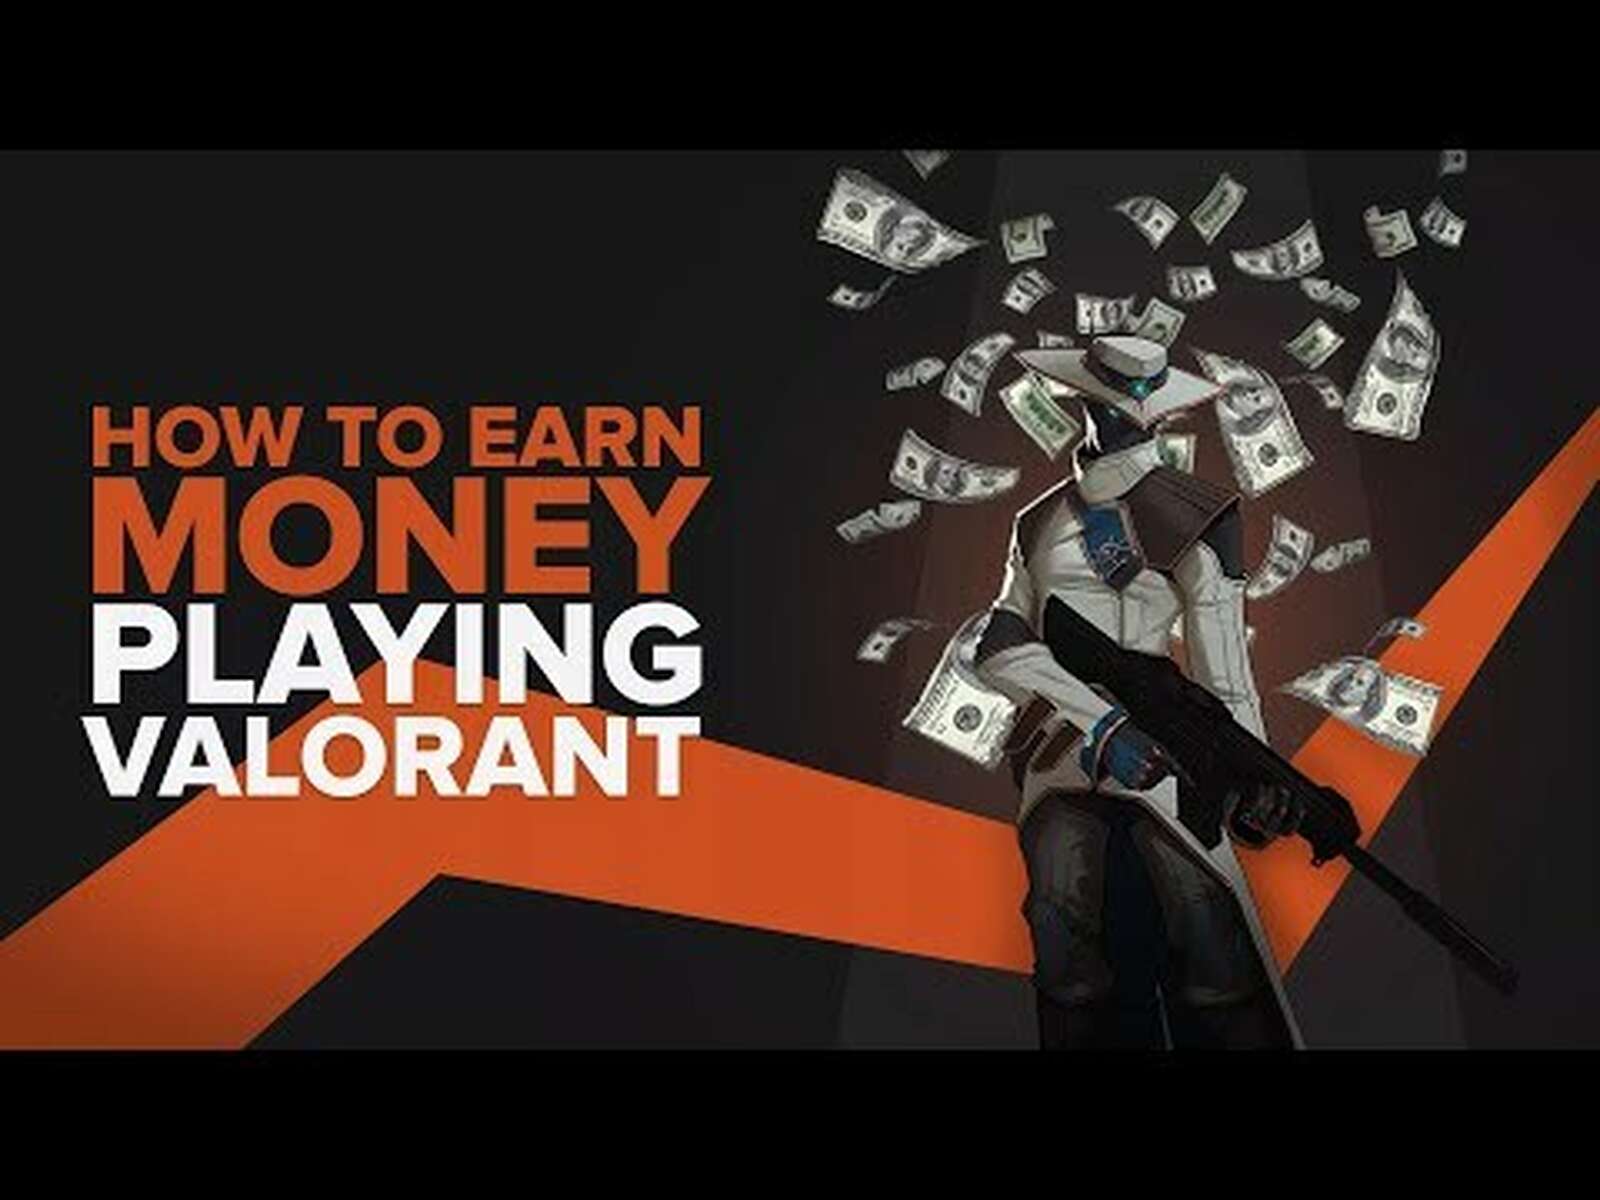 How To Earn MONEY Playing Valorant [4 Methods]